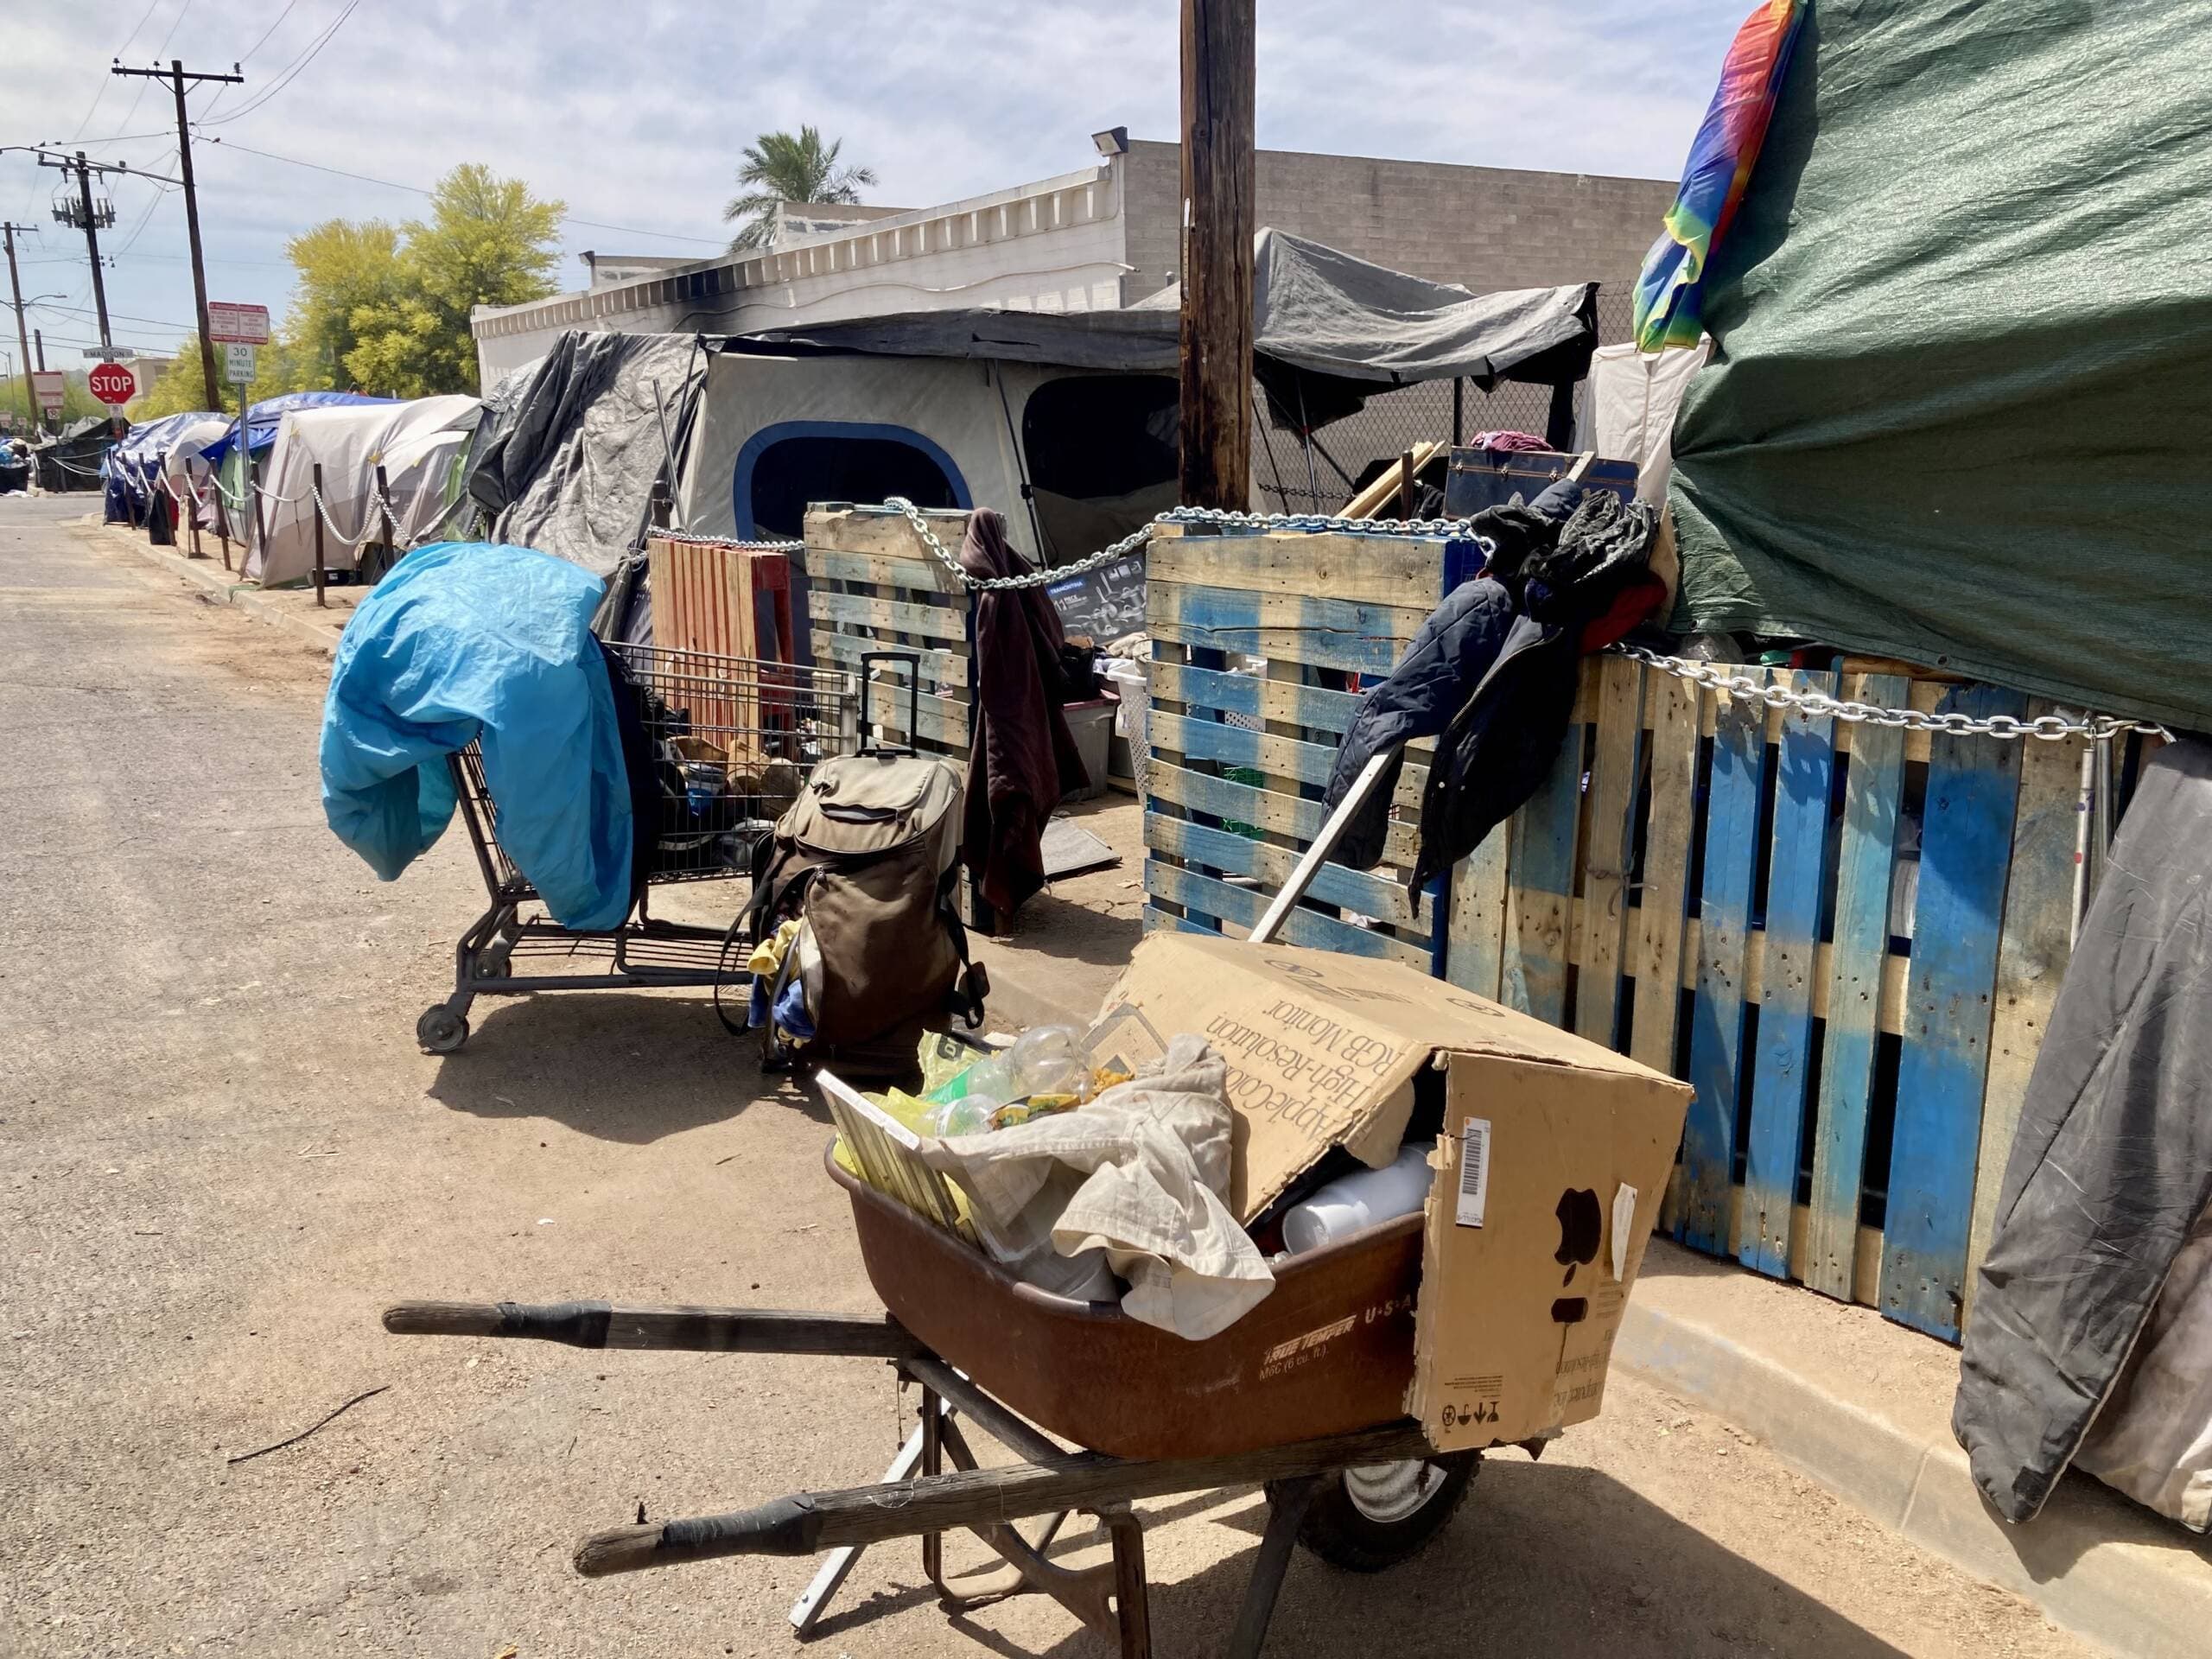 The homeless encampment known as &quot;the Zone&quot; in downtown Phoenix has grown exponentially in recent years. A judge ordered the site to be cleaned up by July. (Peter O'Dowd/Here &amp; Now)